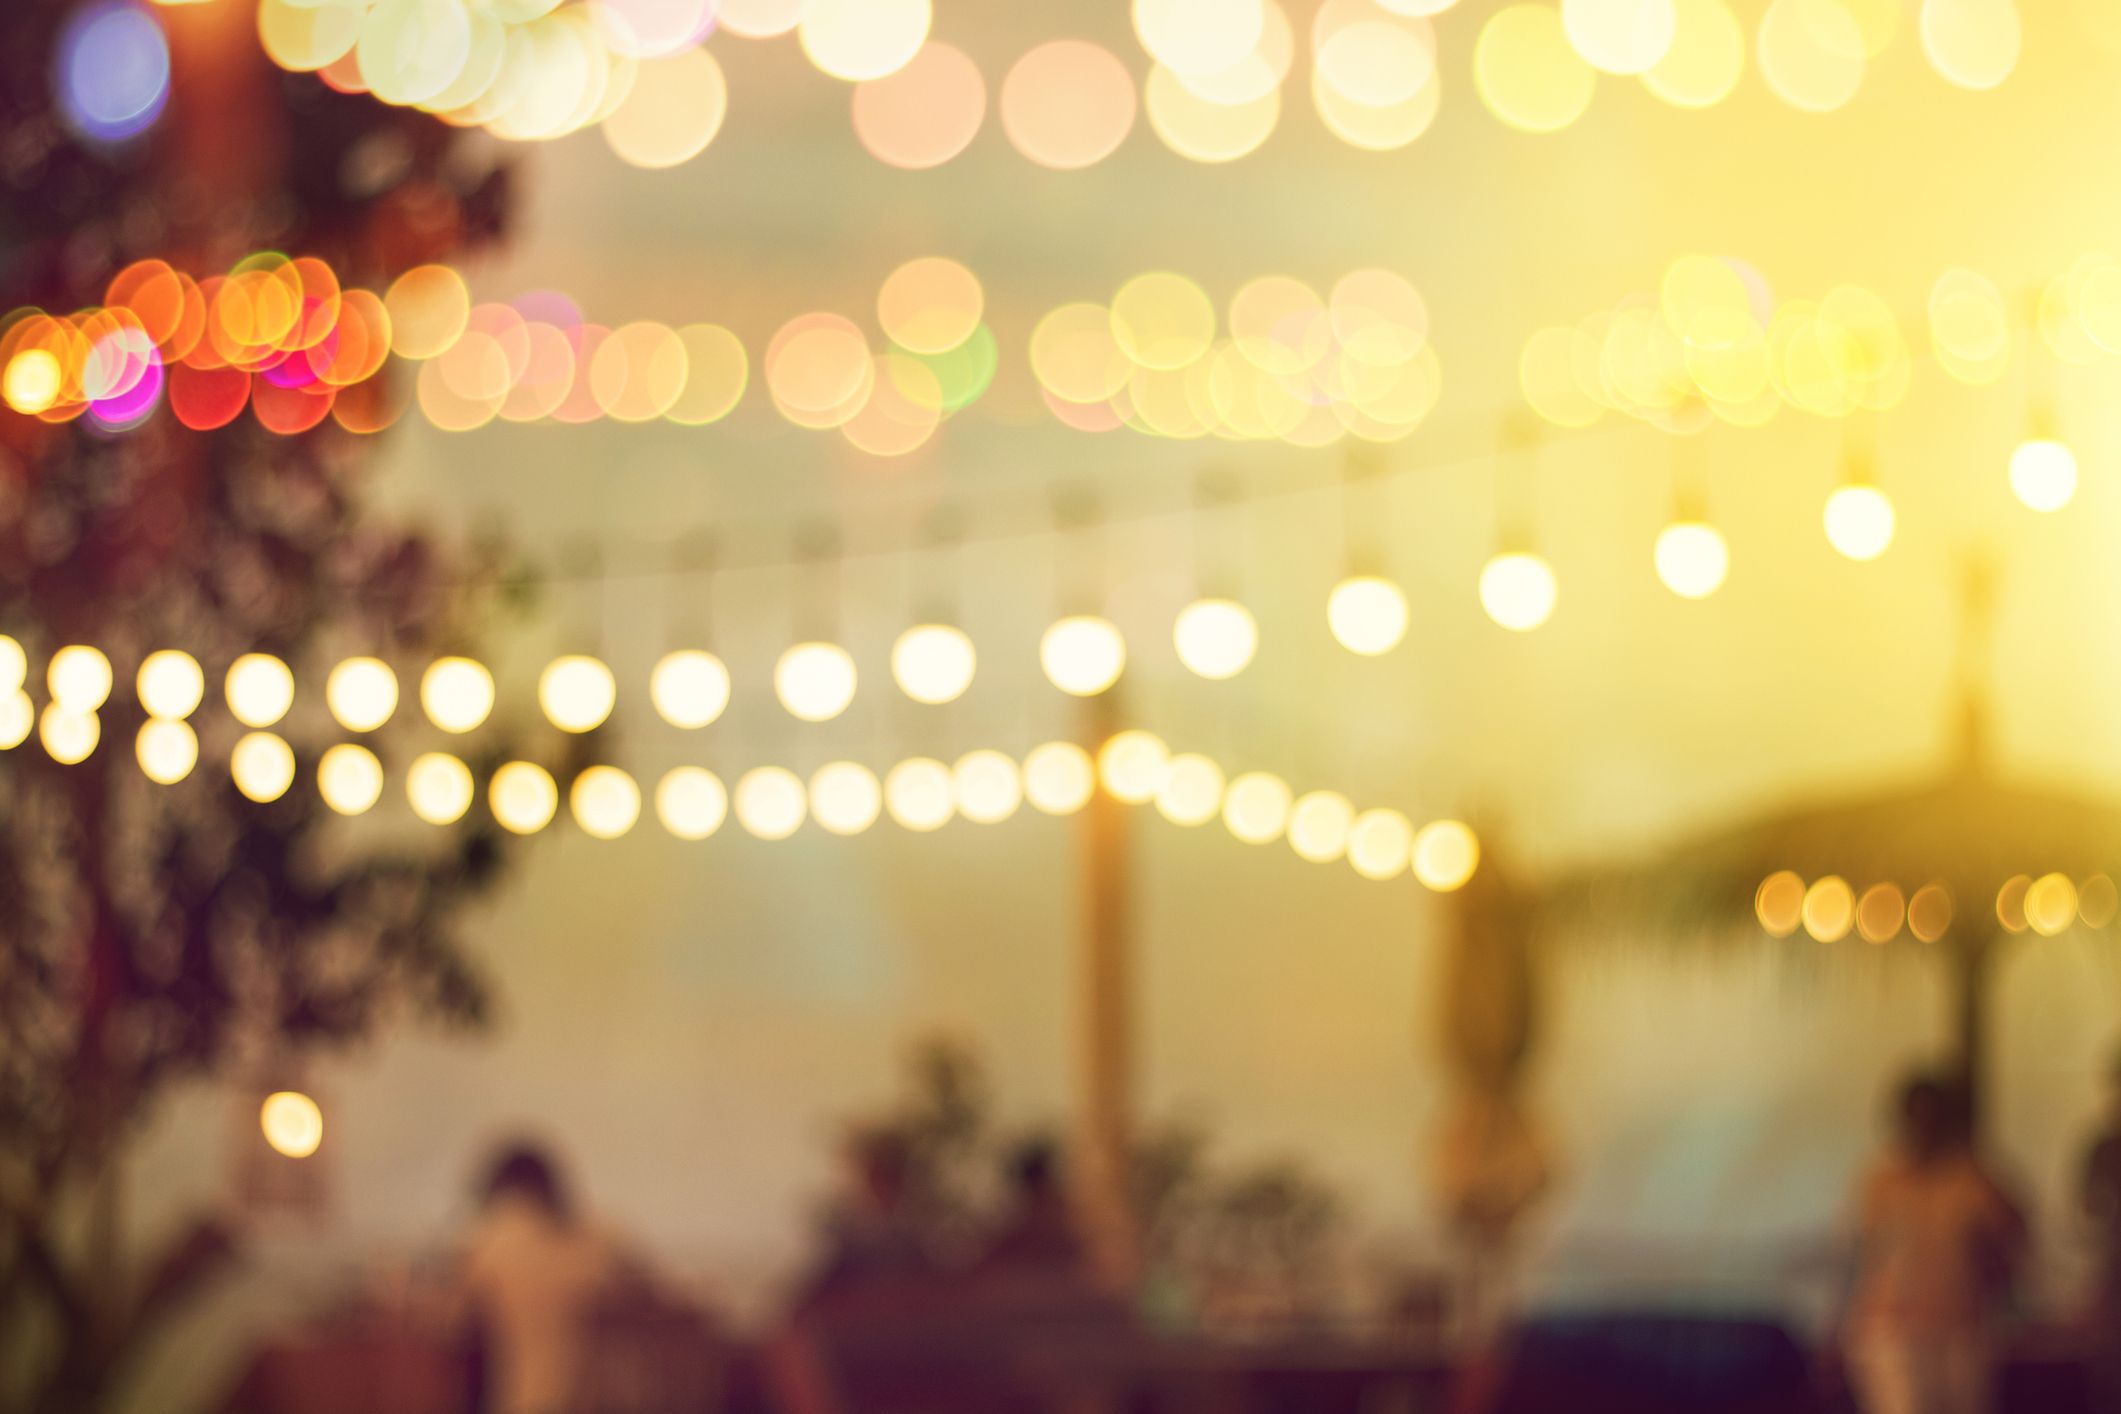 Blurred Bokeh Light On Sunset With Yellow String Lights Decor In Beach Restaurant